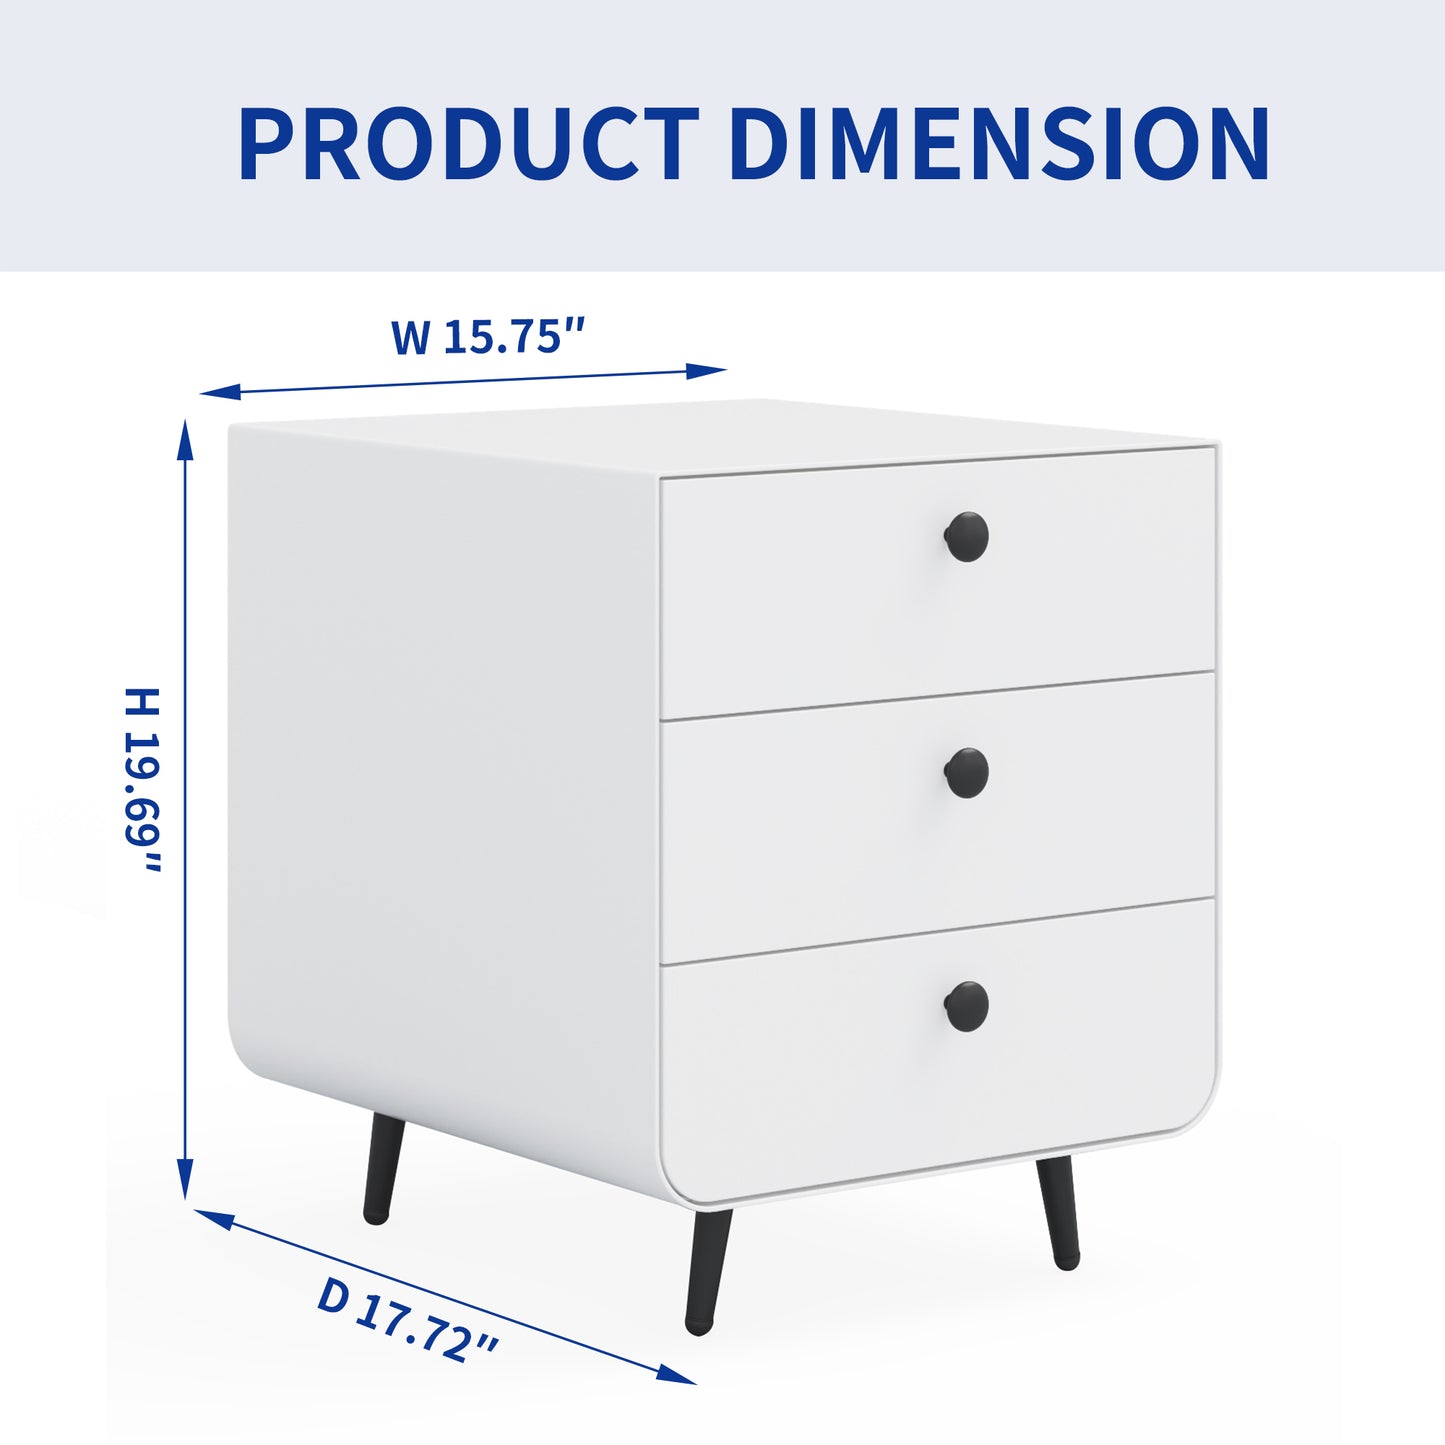 Cache Steel Night Stand in white Finish